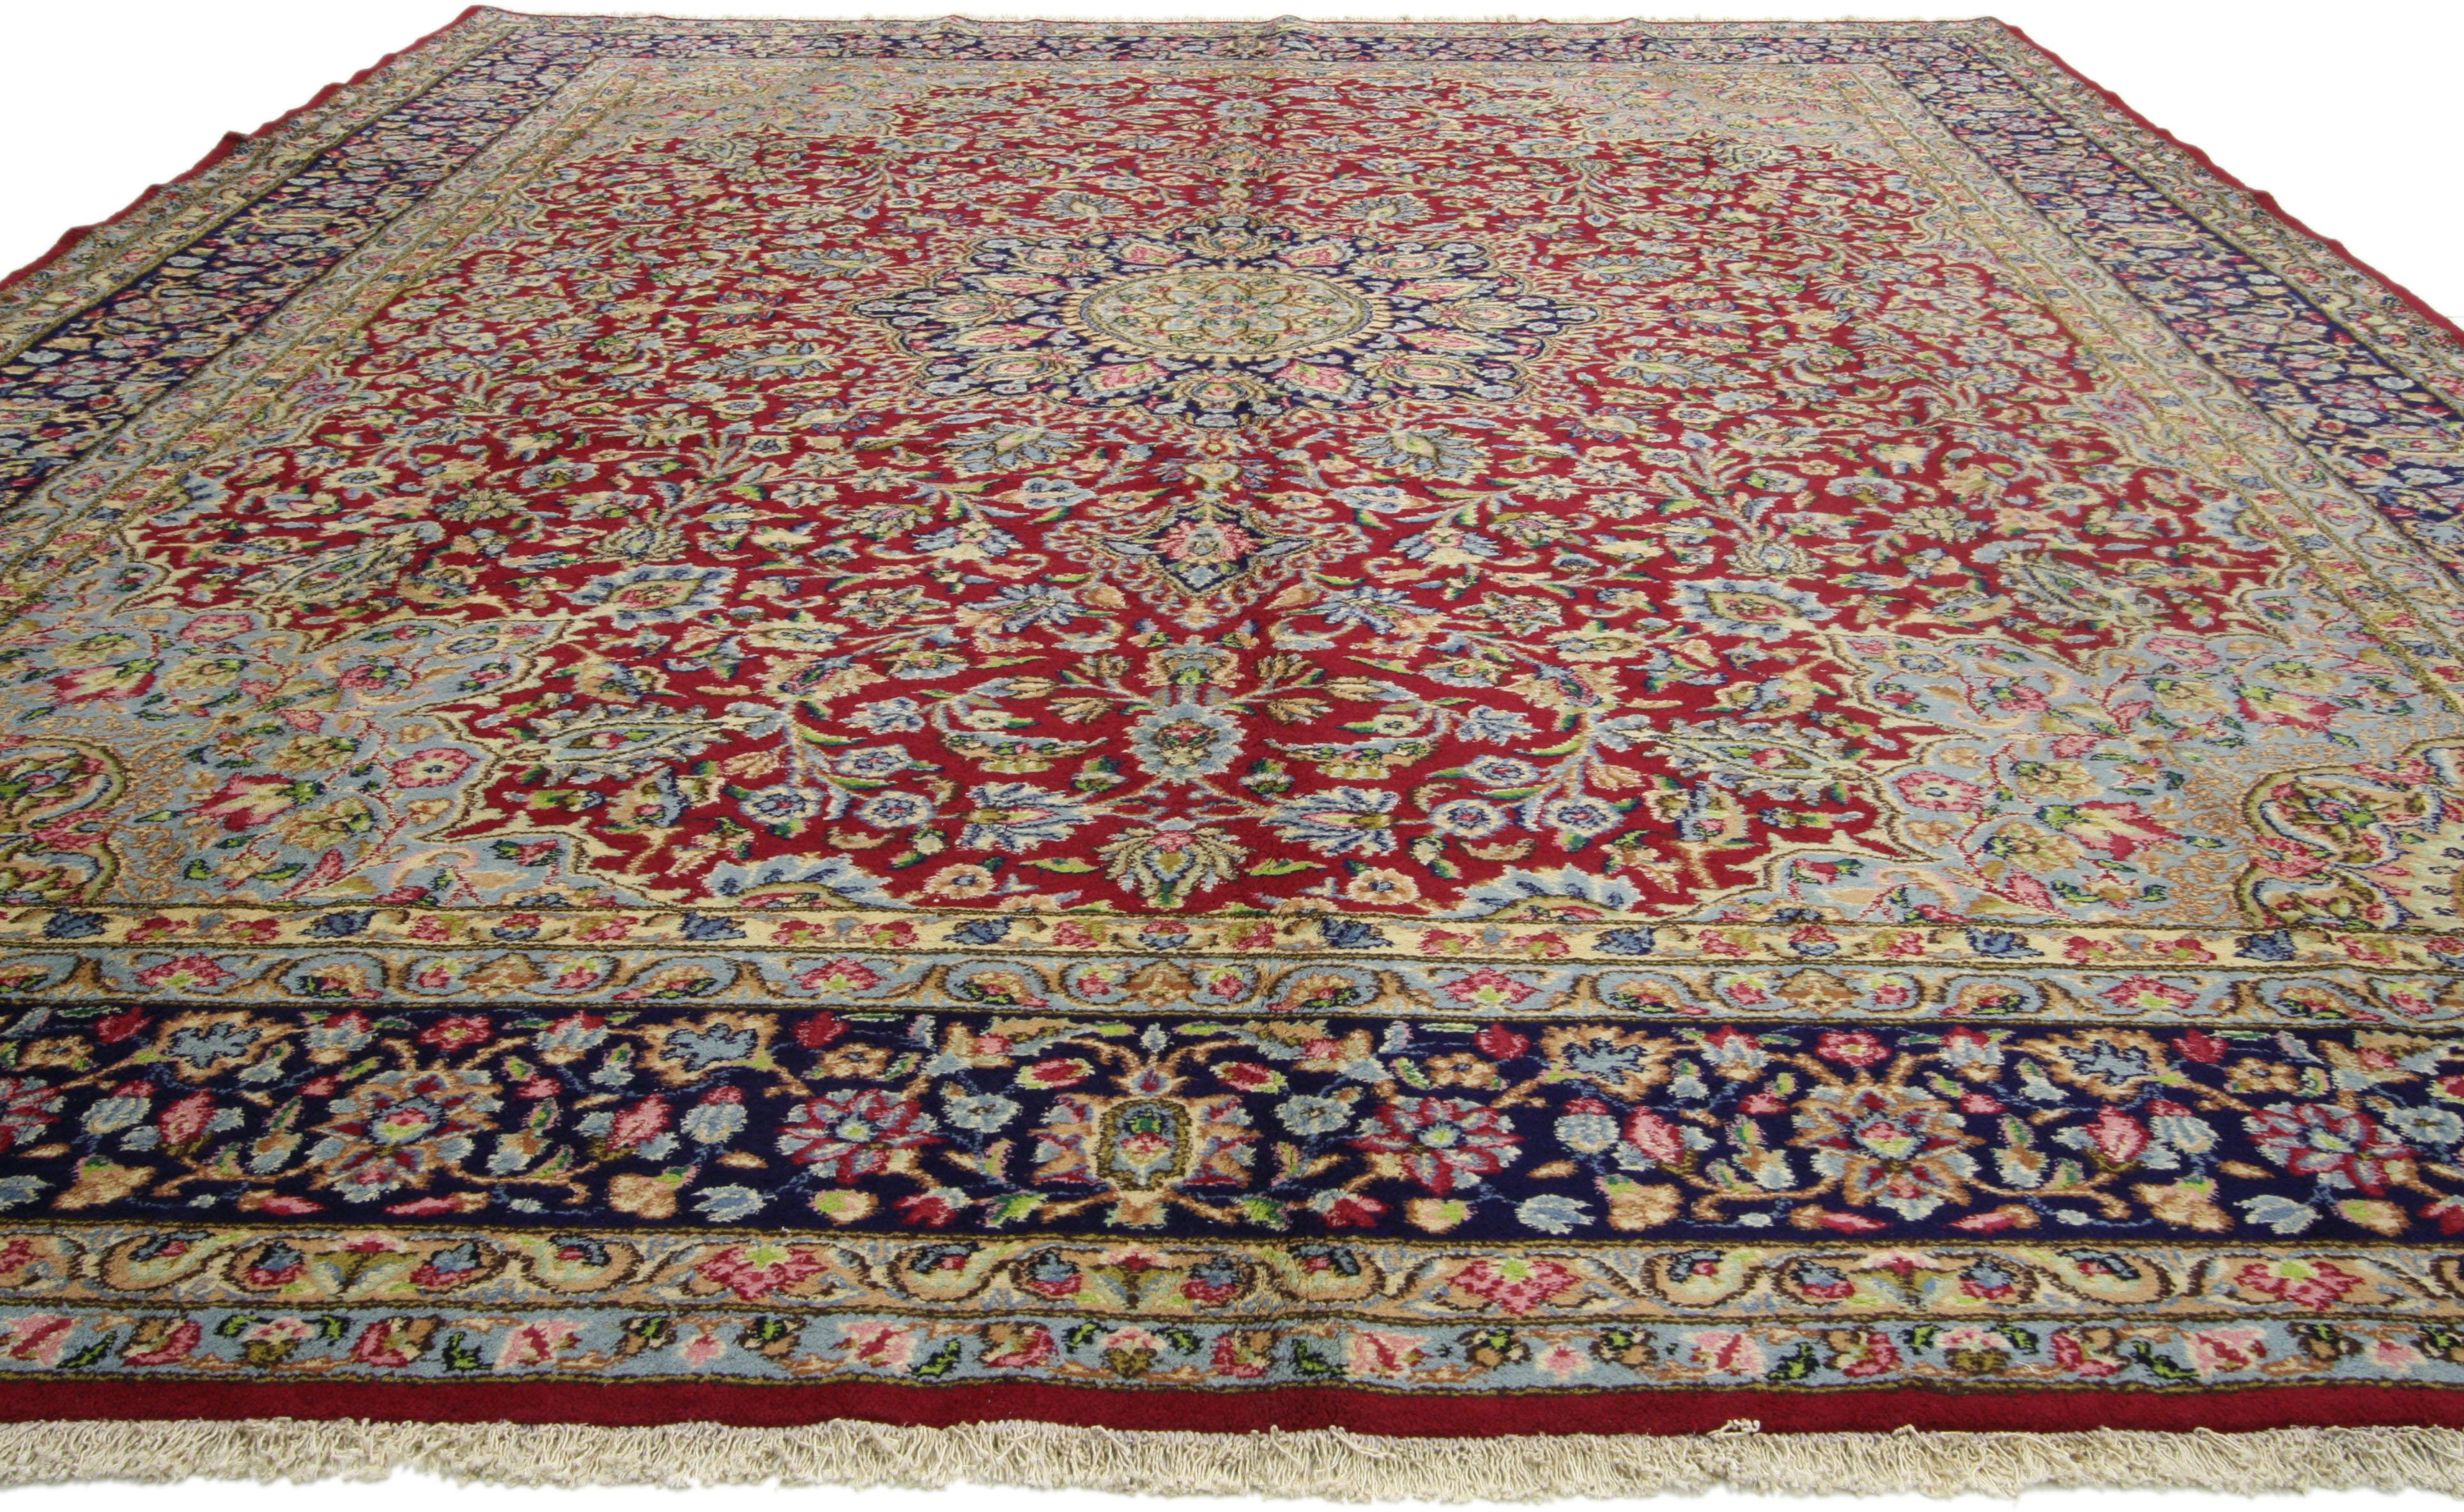 Hand-Knotted Vintage Persian Kerman Rug with Old World French Victorian Style, Kirman Rug